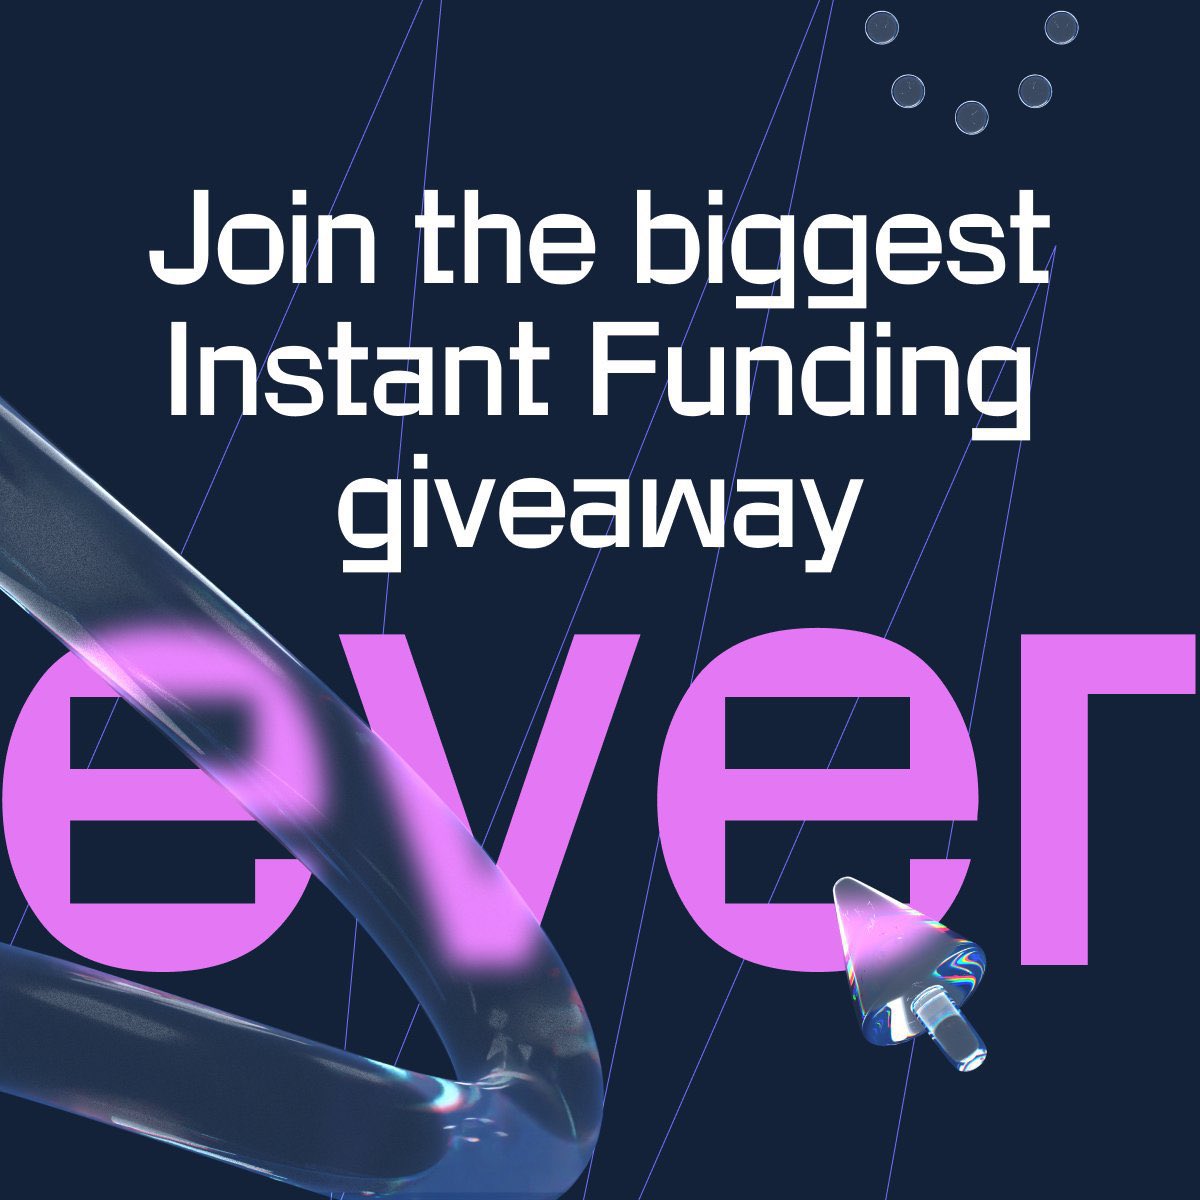 Hello Levi Army⚔️ Instant Funding is giving away $10,000,000 in One-Phase challenges on their dashboard — sign up for free to enter: hub.instantfunding.io/?utm_medium=sh… twitter.com/messages/media…